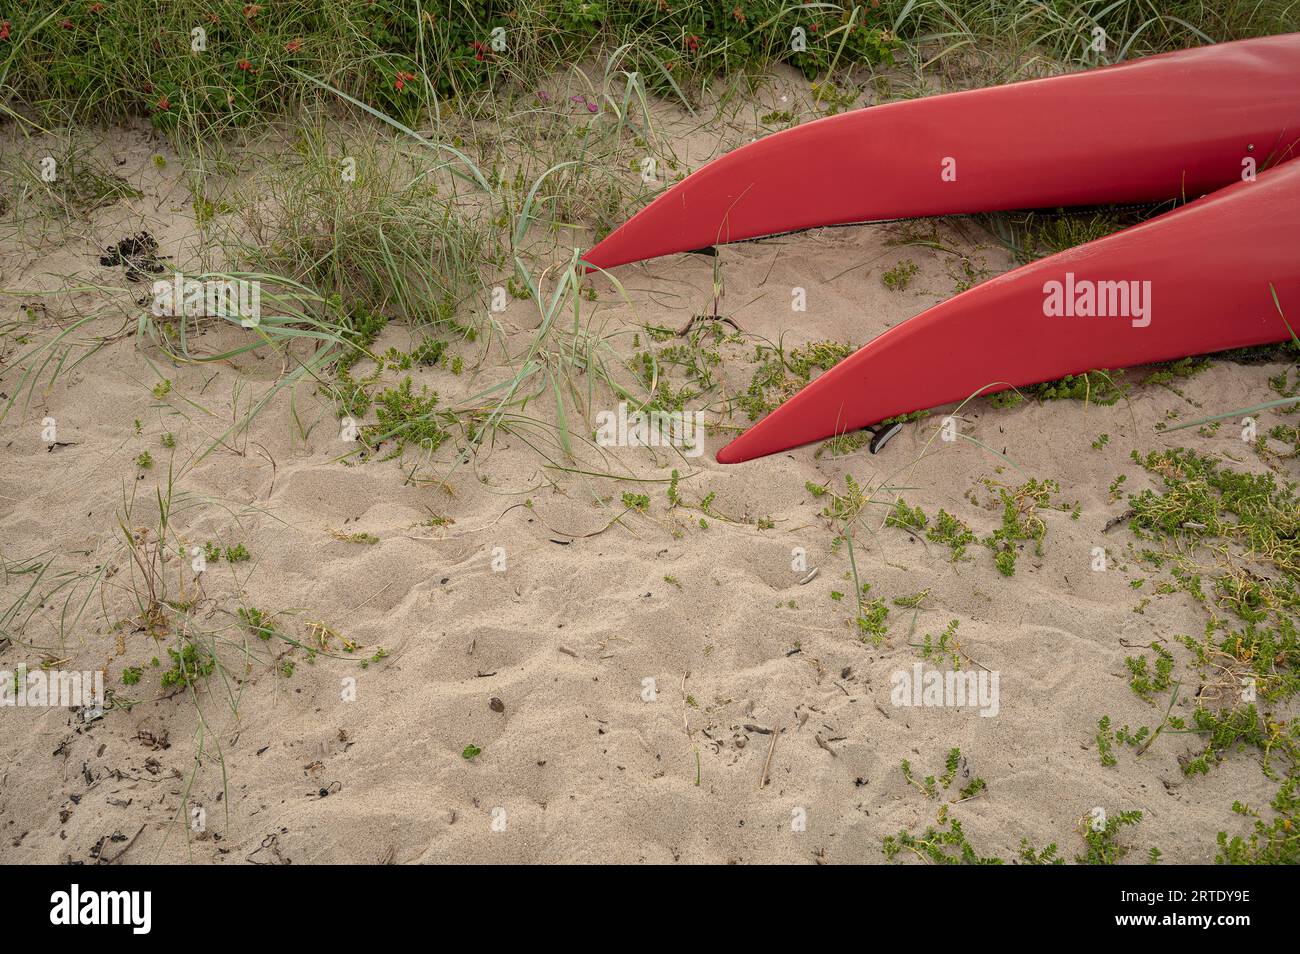 the bow of two red kyaks on a sandy shore with green plants Stock Photo